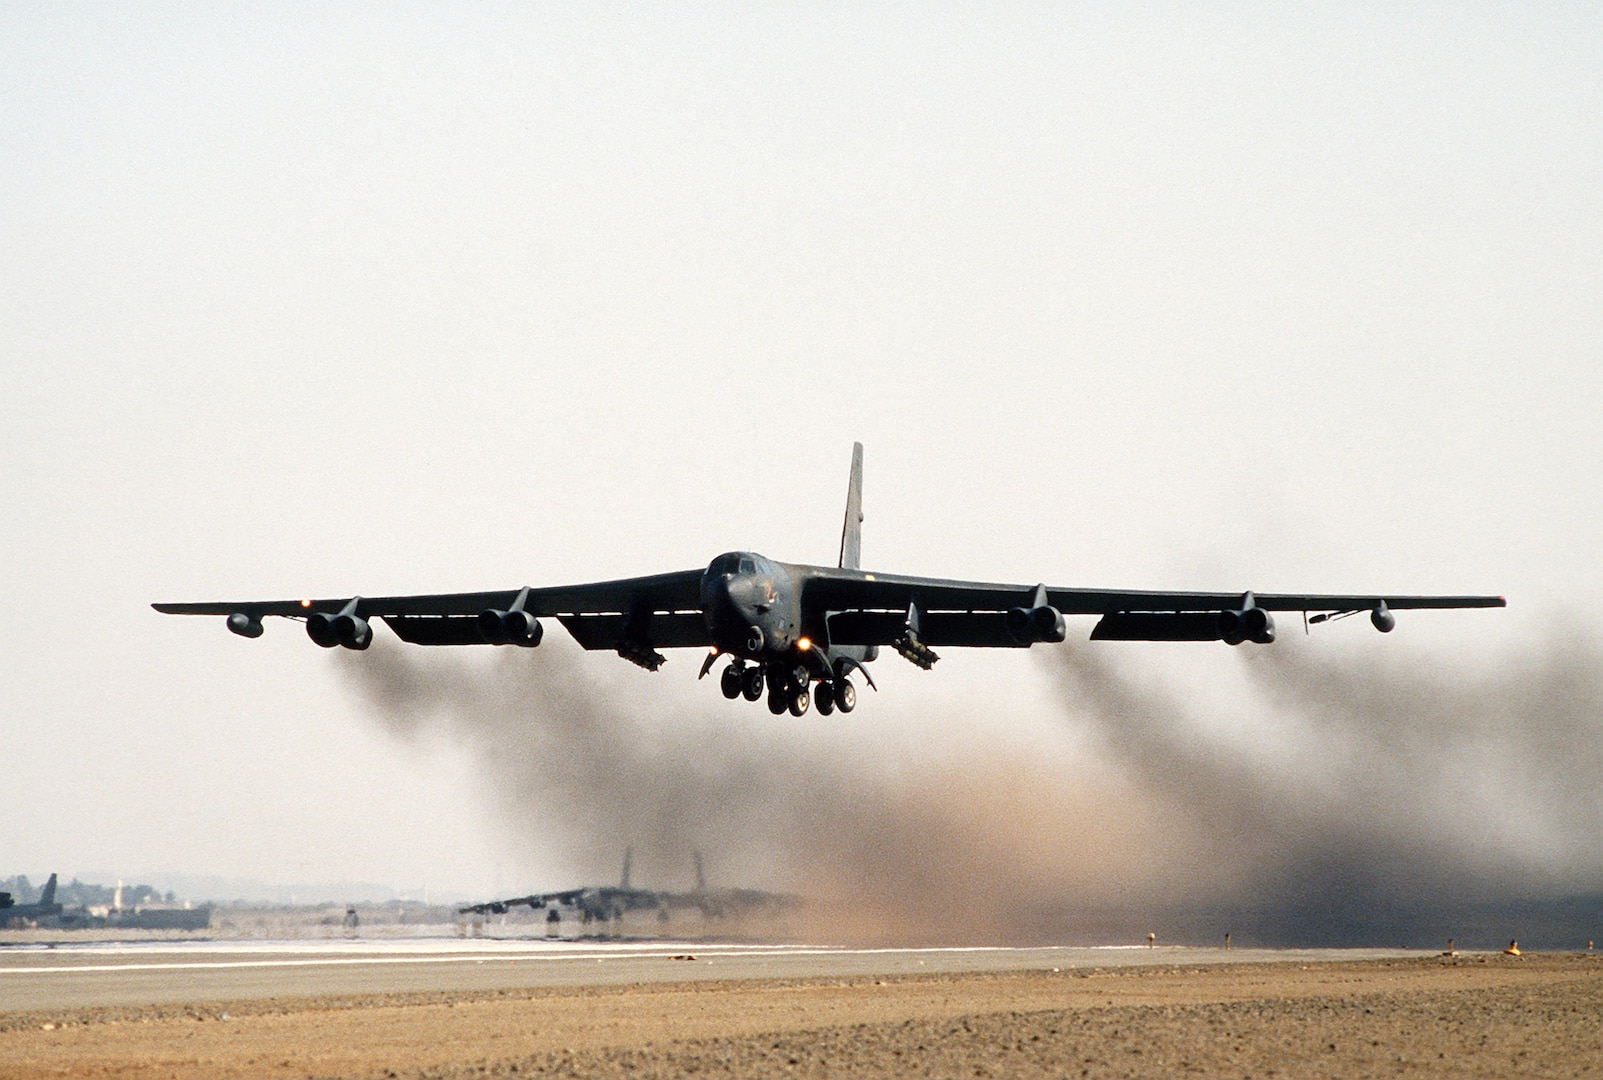 A B-52 bomber takes off as two others wait on the runway. DLA Aviation is tasked with helping sustain the Air Force’s long-range bomber for another 30-plus years.